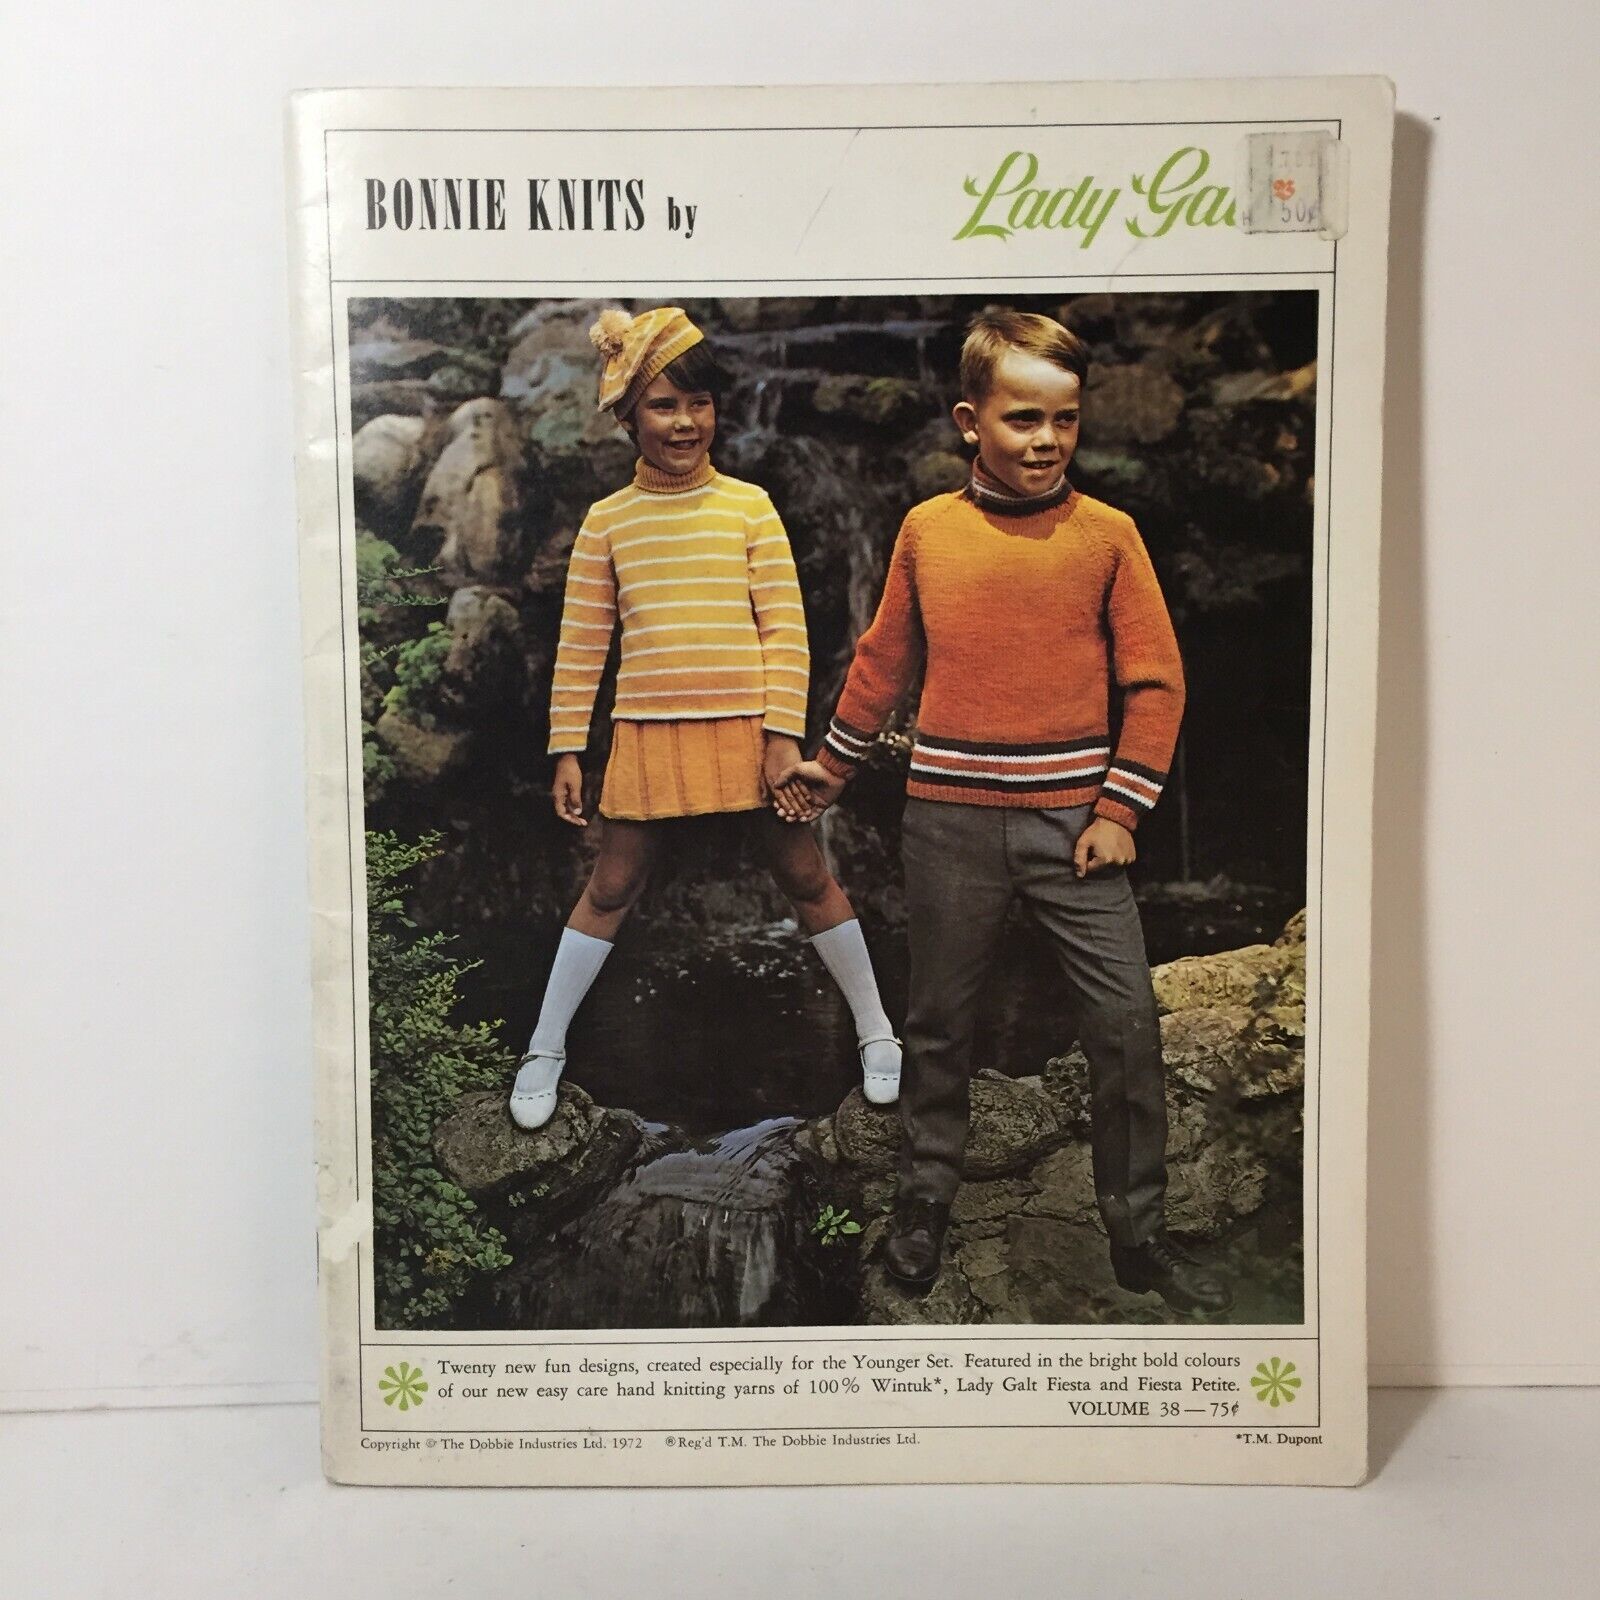 Bonnie Knits by Lady Galt Children Sweater Knitting Patterns Hats Socks and more - $15.82